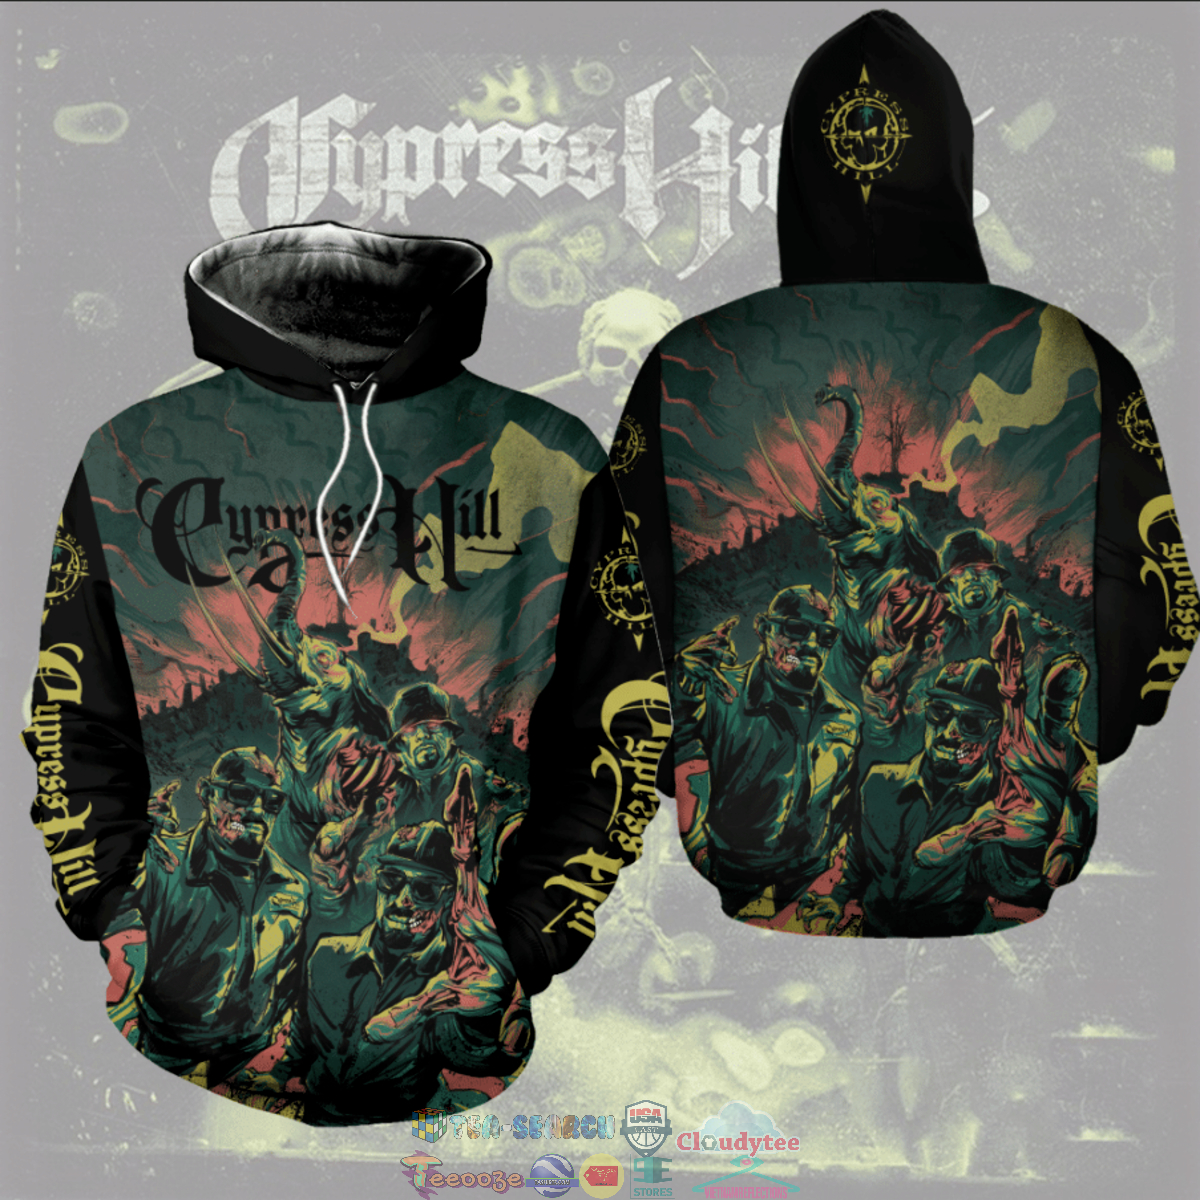 Cypress Hill ver 2 3D hoodie and t-shirt